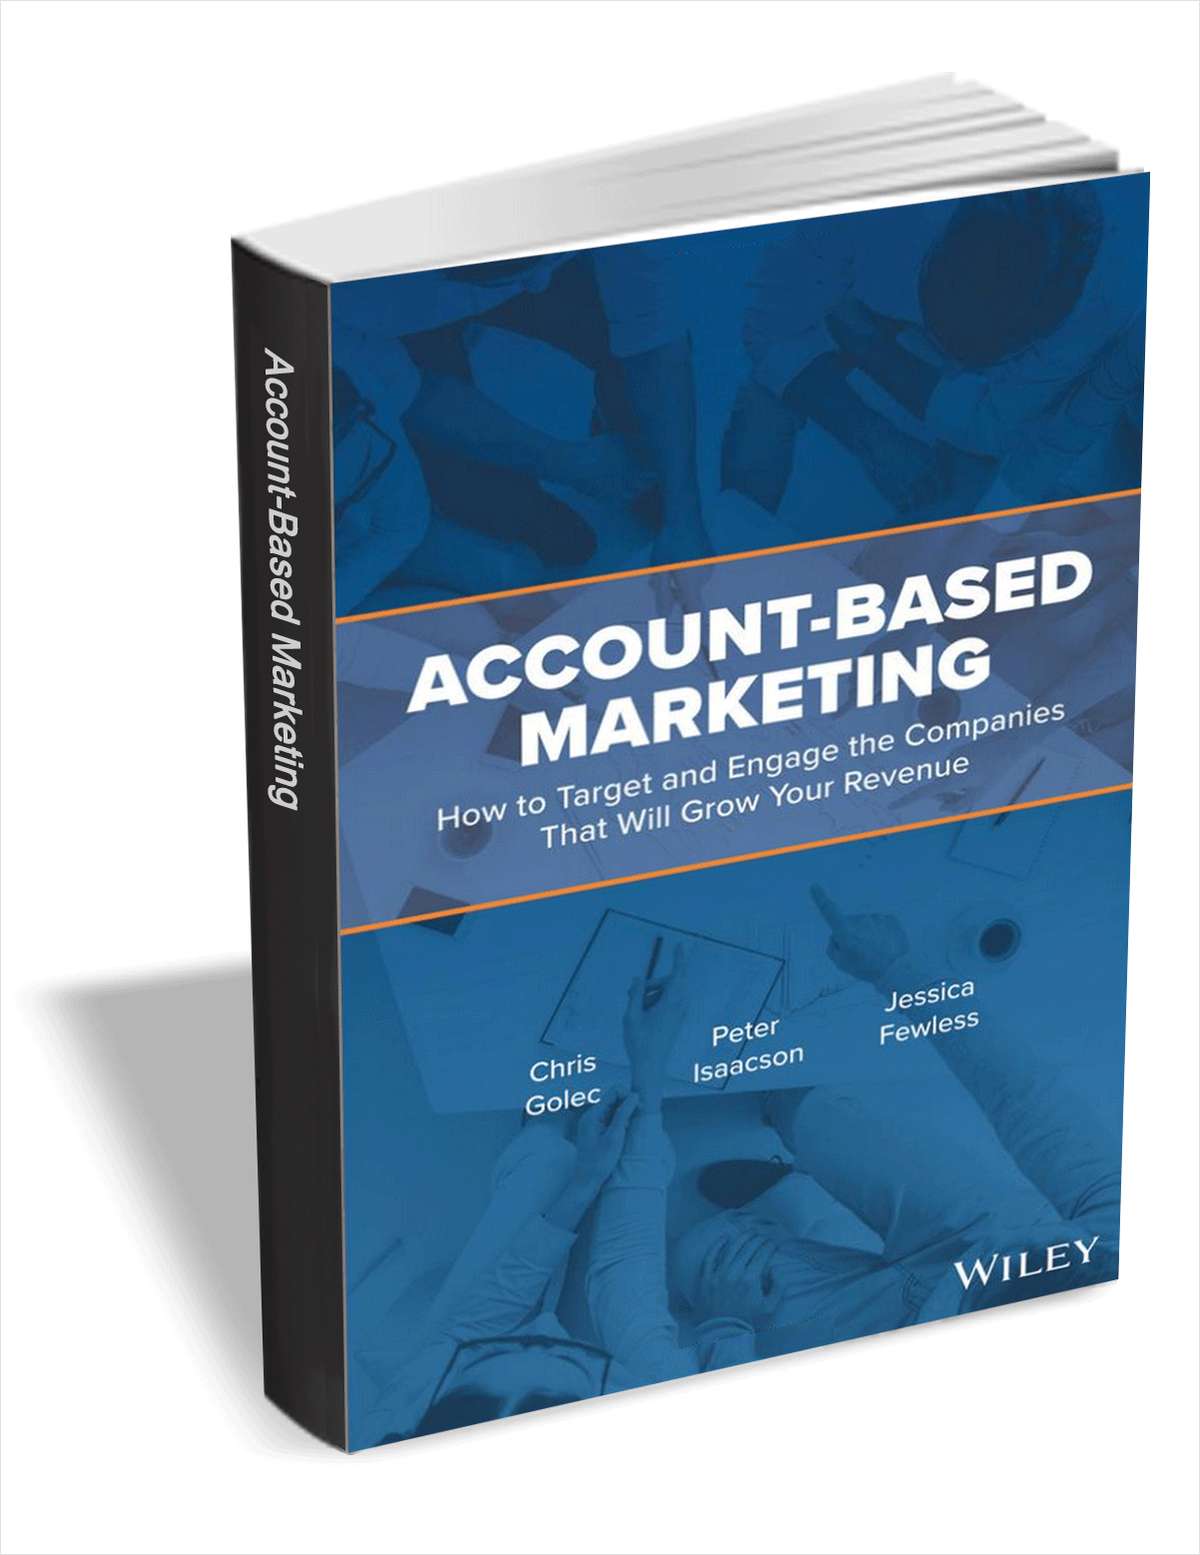 Account-Based Marketing: How to Target and Engage the Companies That Will Grow Your Revenue ($20.00 Value) FREE for a Limited Time